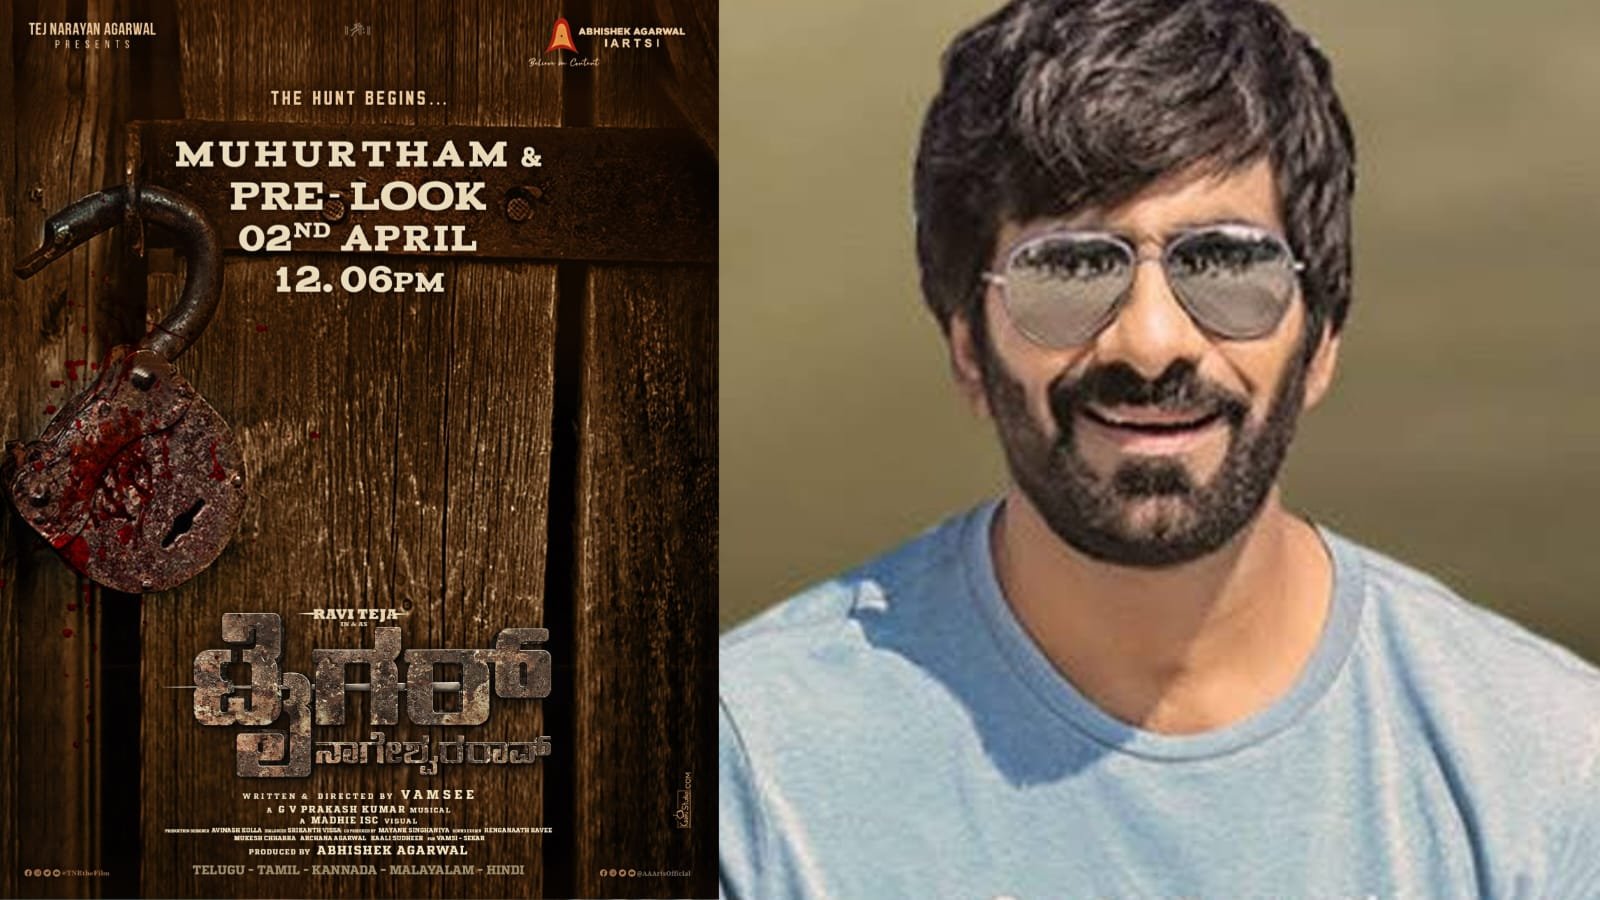 Tiger Nageshwara Rao, Ravi Teja’s first Pan India Project will be launched on April 2